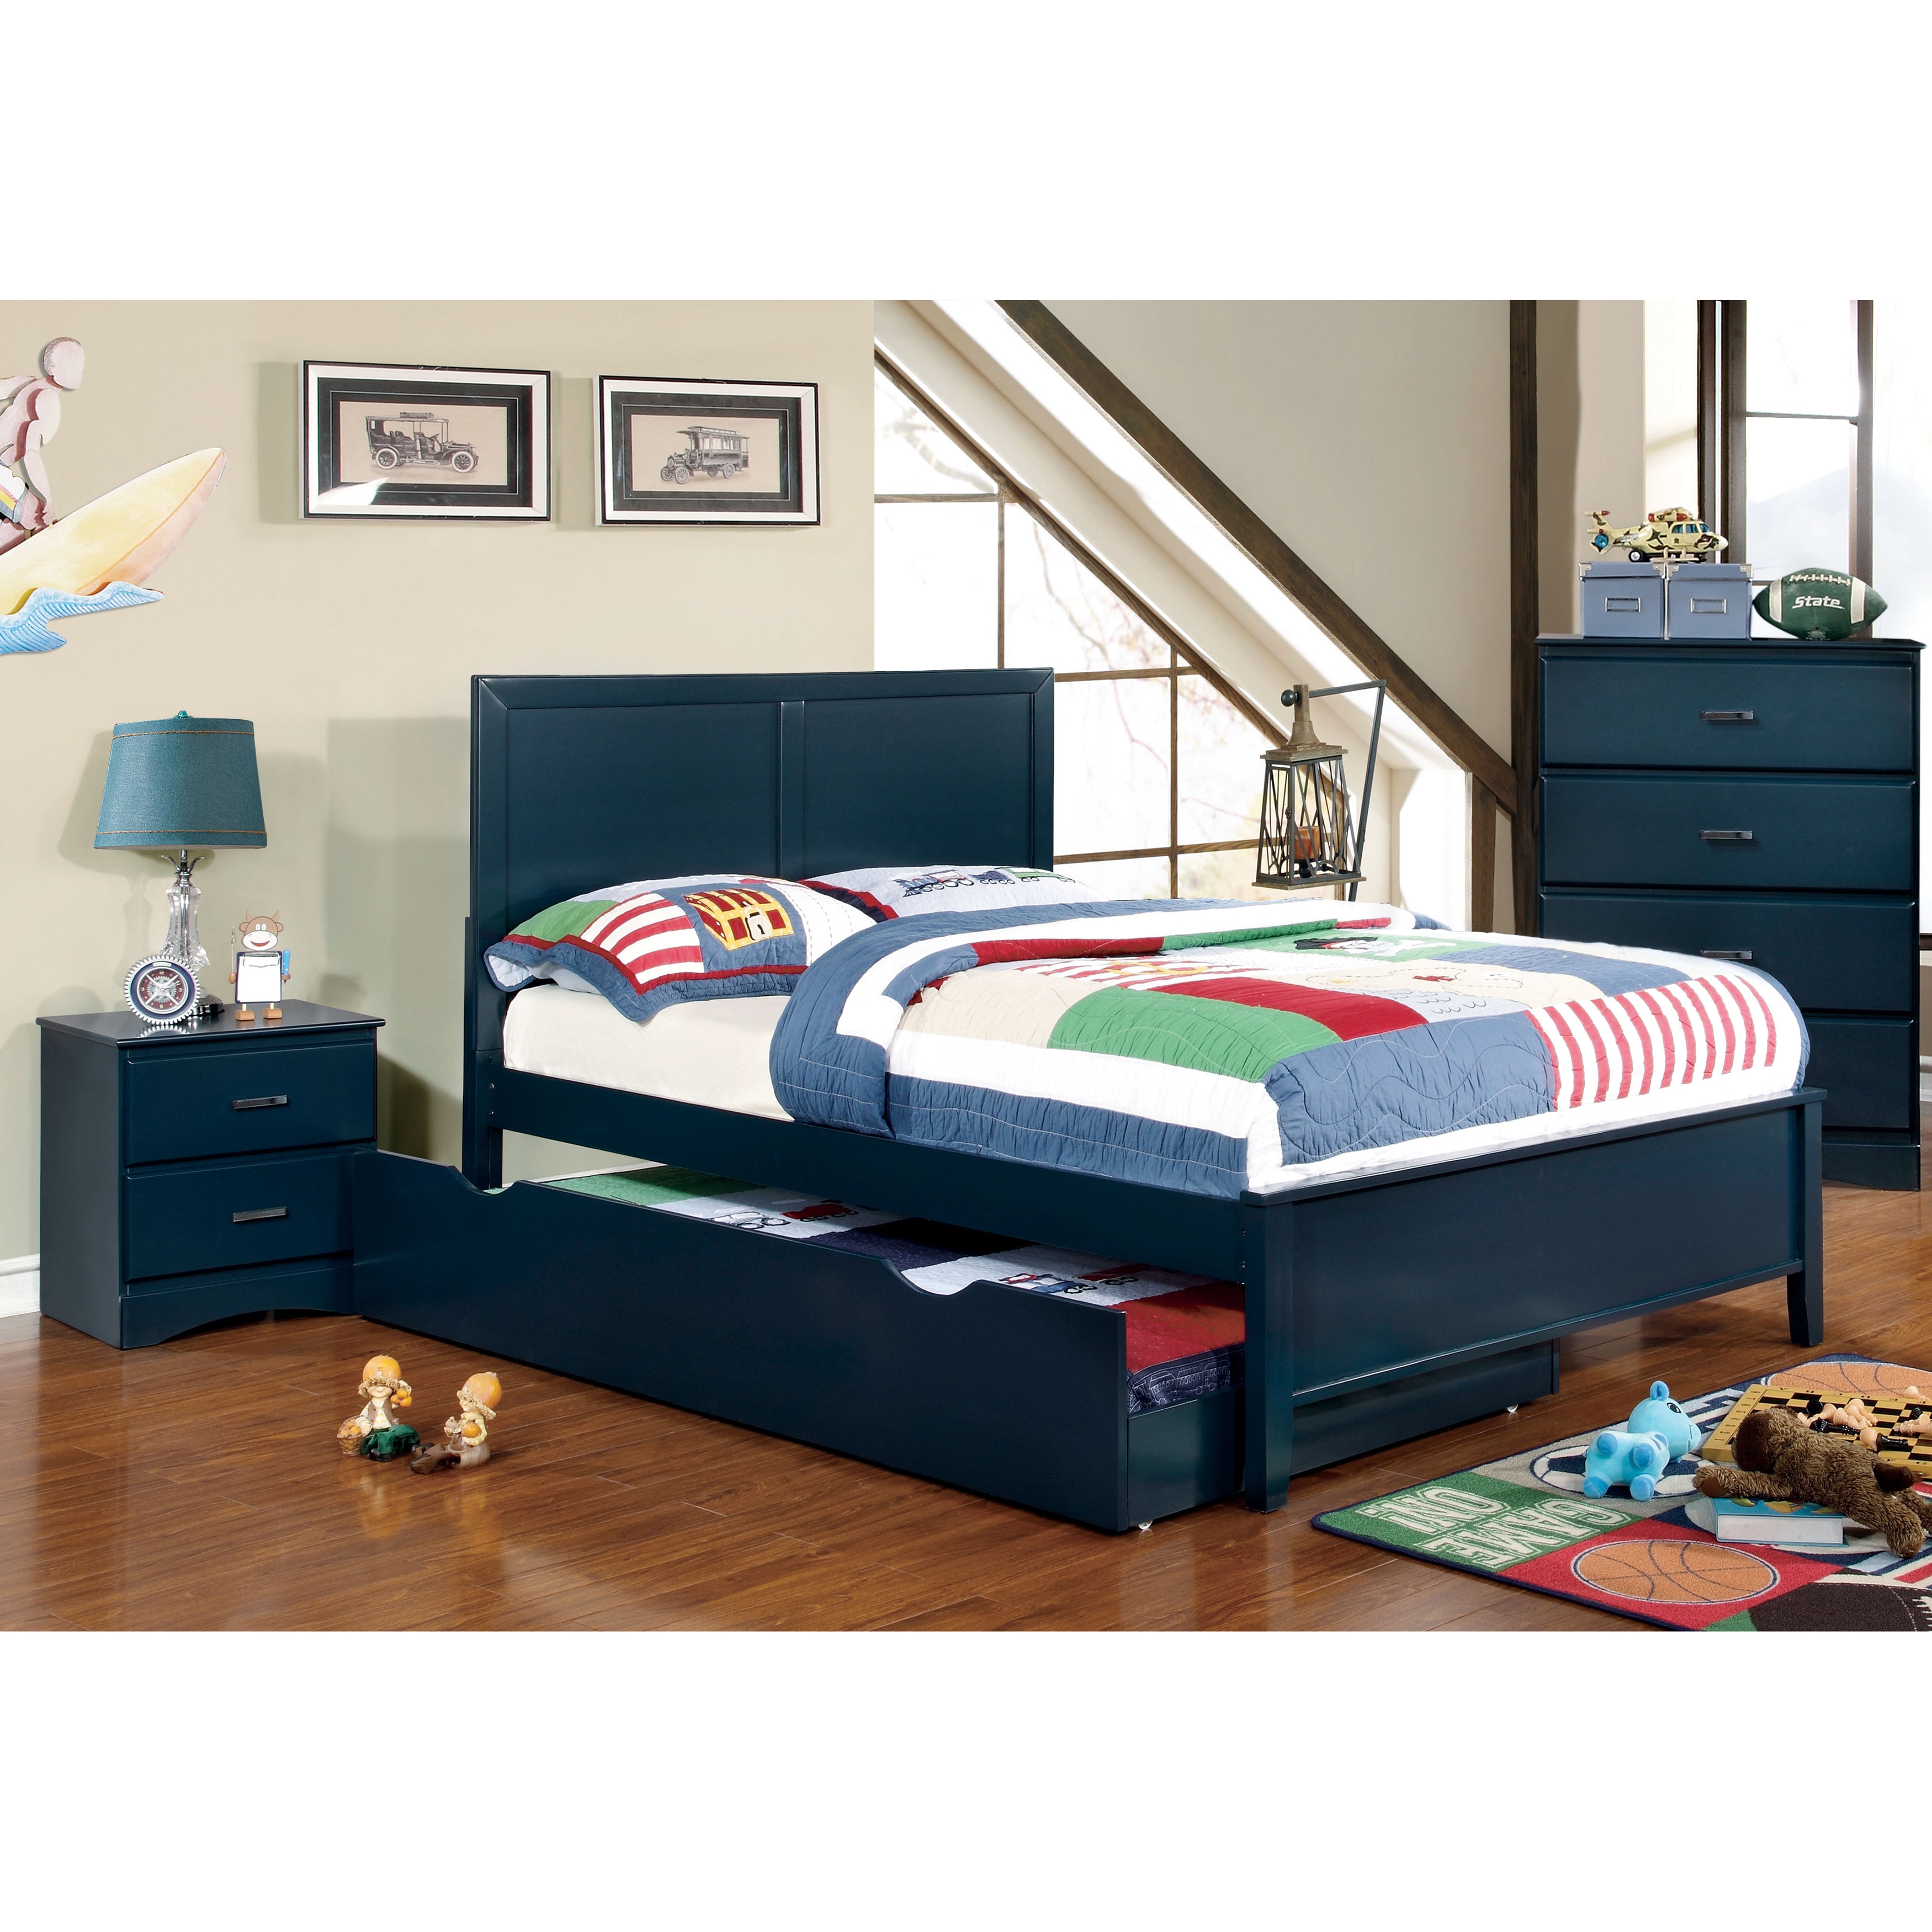 Furniture of America Colorpop 4-piece Full-size Youth Bedroom Set ...